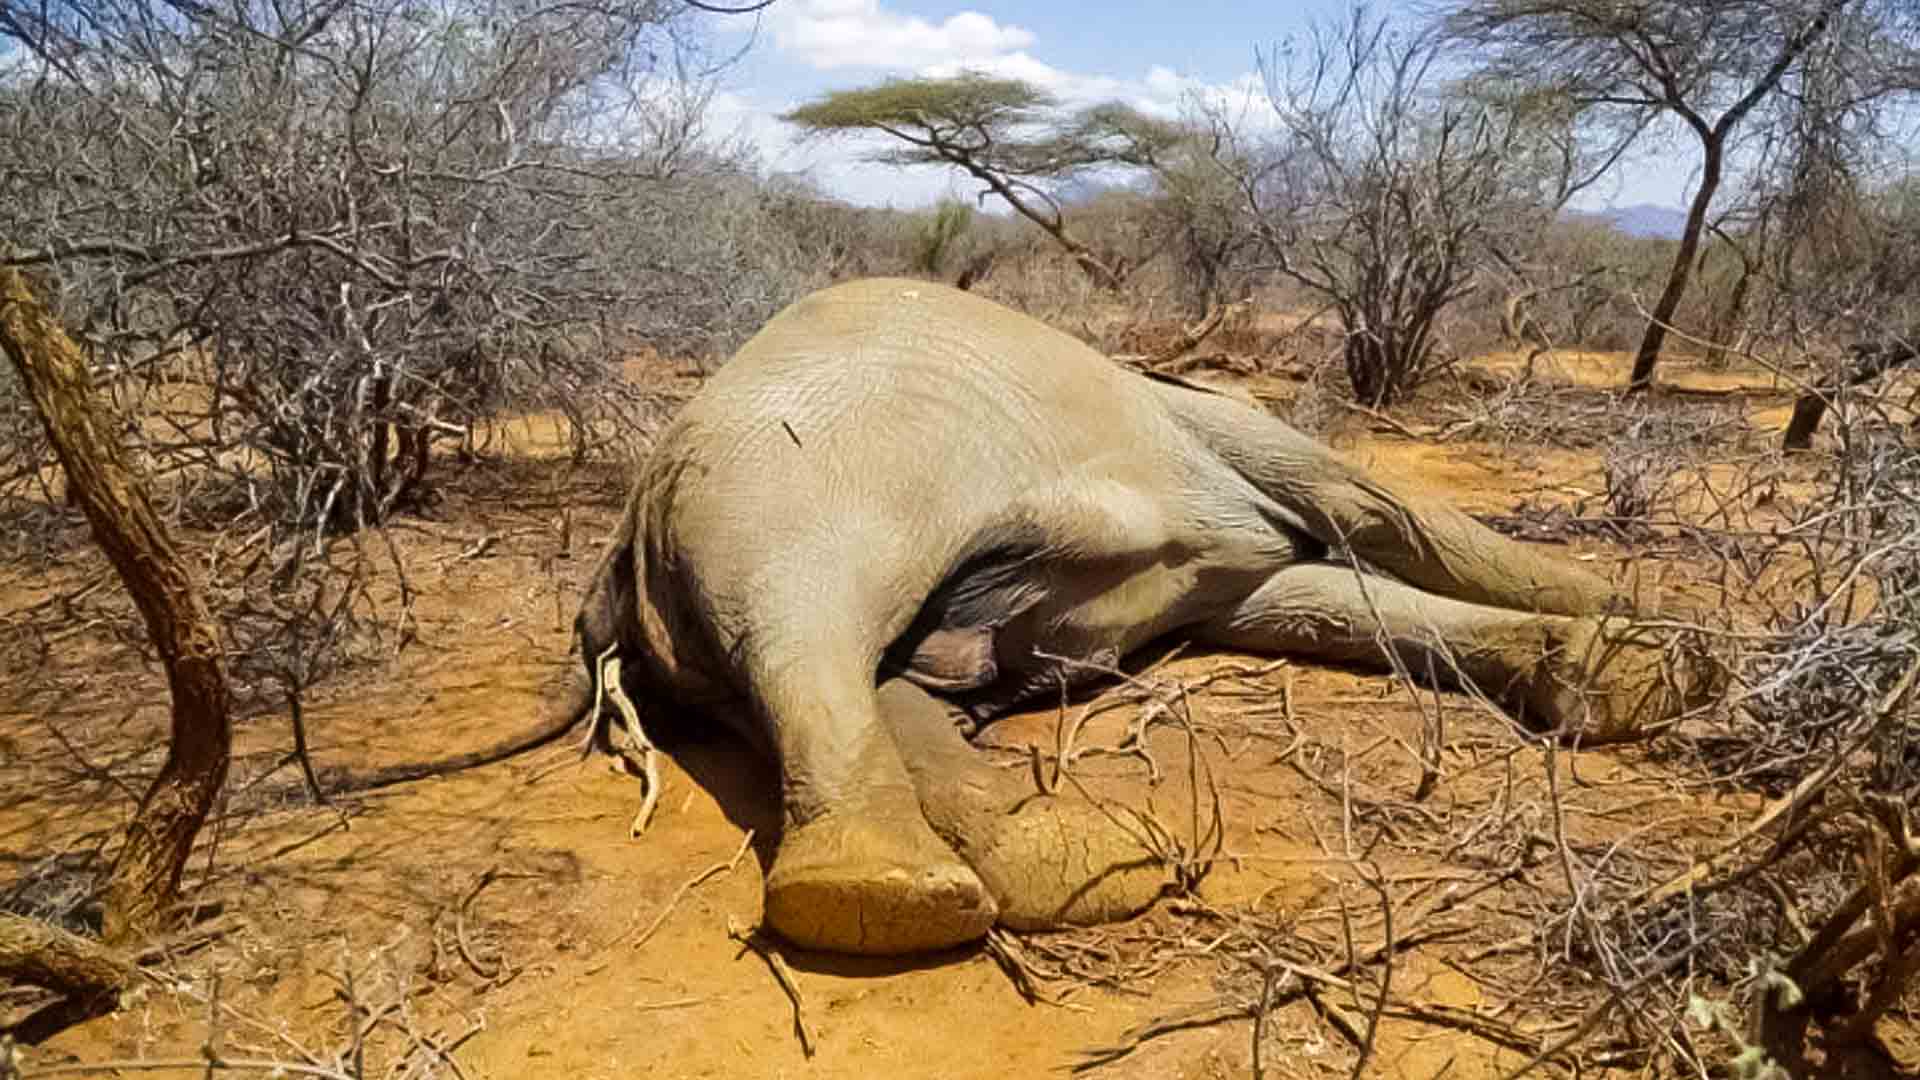 Kenya suffers a drought that results in hundreds of elephants and zebras dying